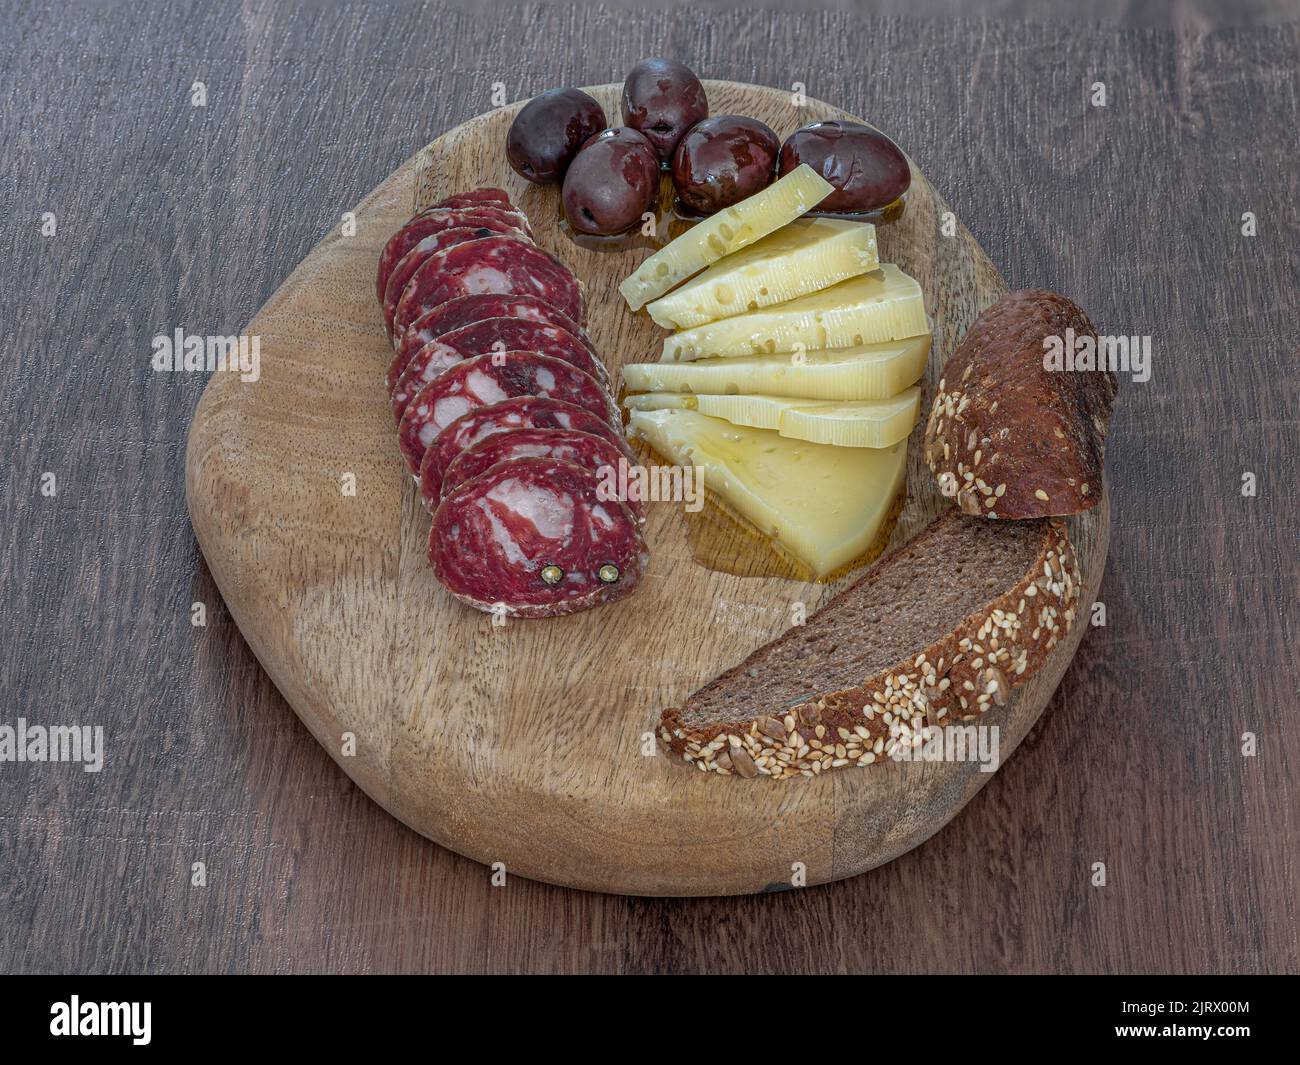 traditional homemade Istrian salami sausage with cheese olives and brown bread on wood tray stock photo Stock Photo